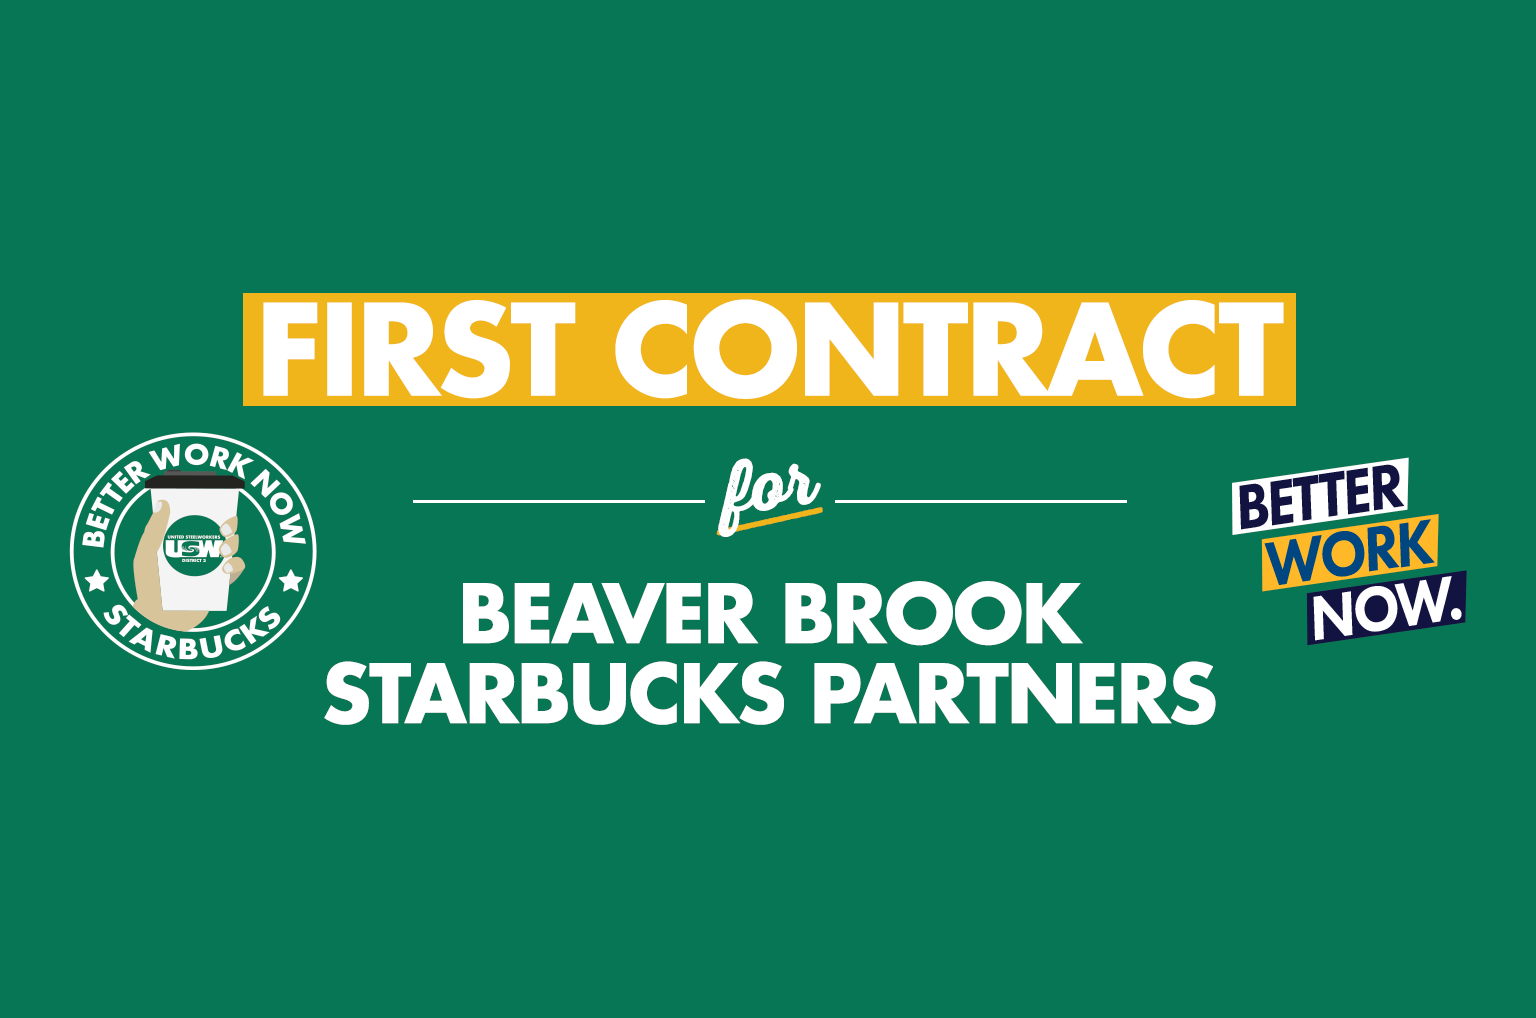 First Contract for Beaver Brook Starbucks partners